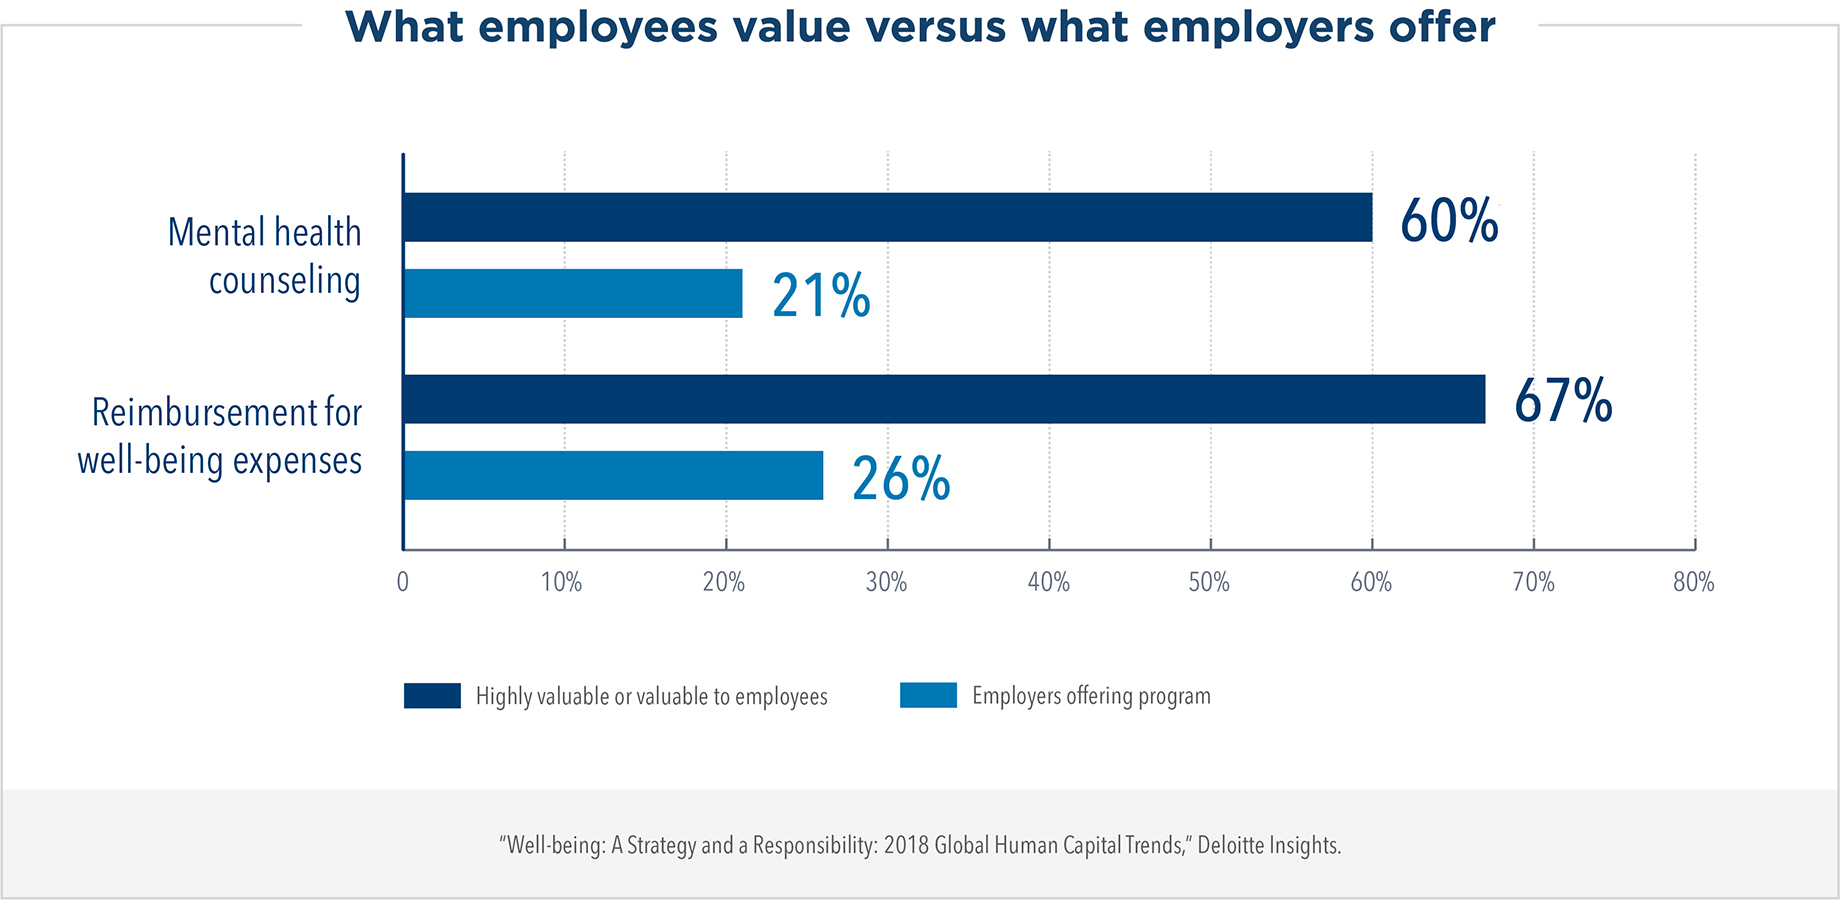 What employees value versus what employers offer: 60% of employees find mental health counseling highly valuable or valuable, but only 21% of employers offer a program for it. 67% of employees find reimbursement for well-being expenses highly valuable or valuable, but only 26% of employers offer a program for it.